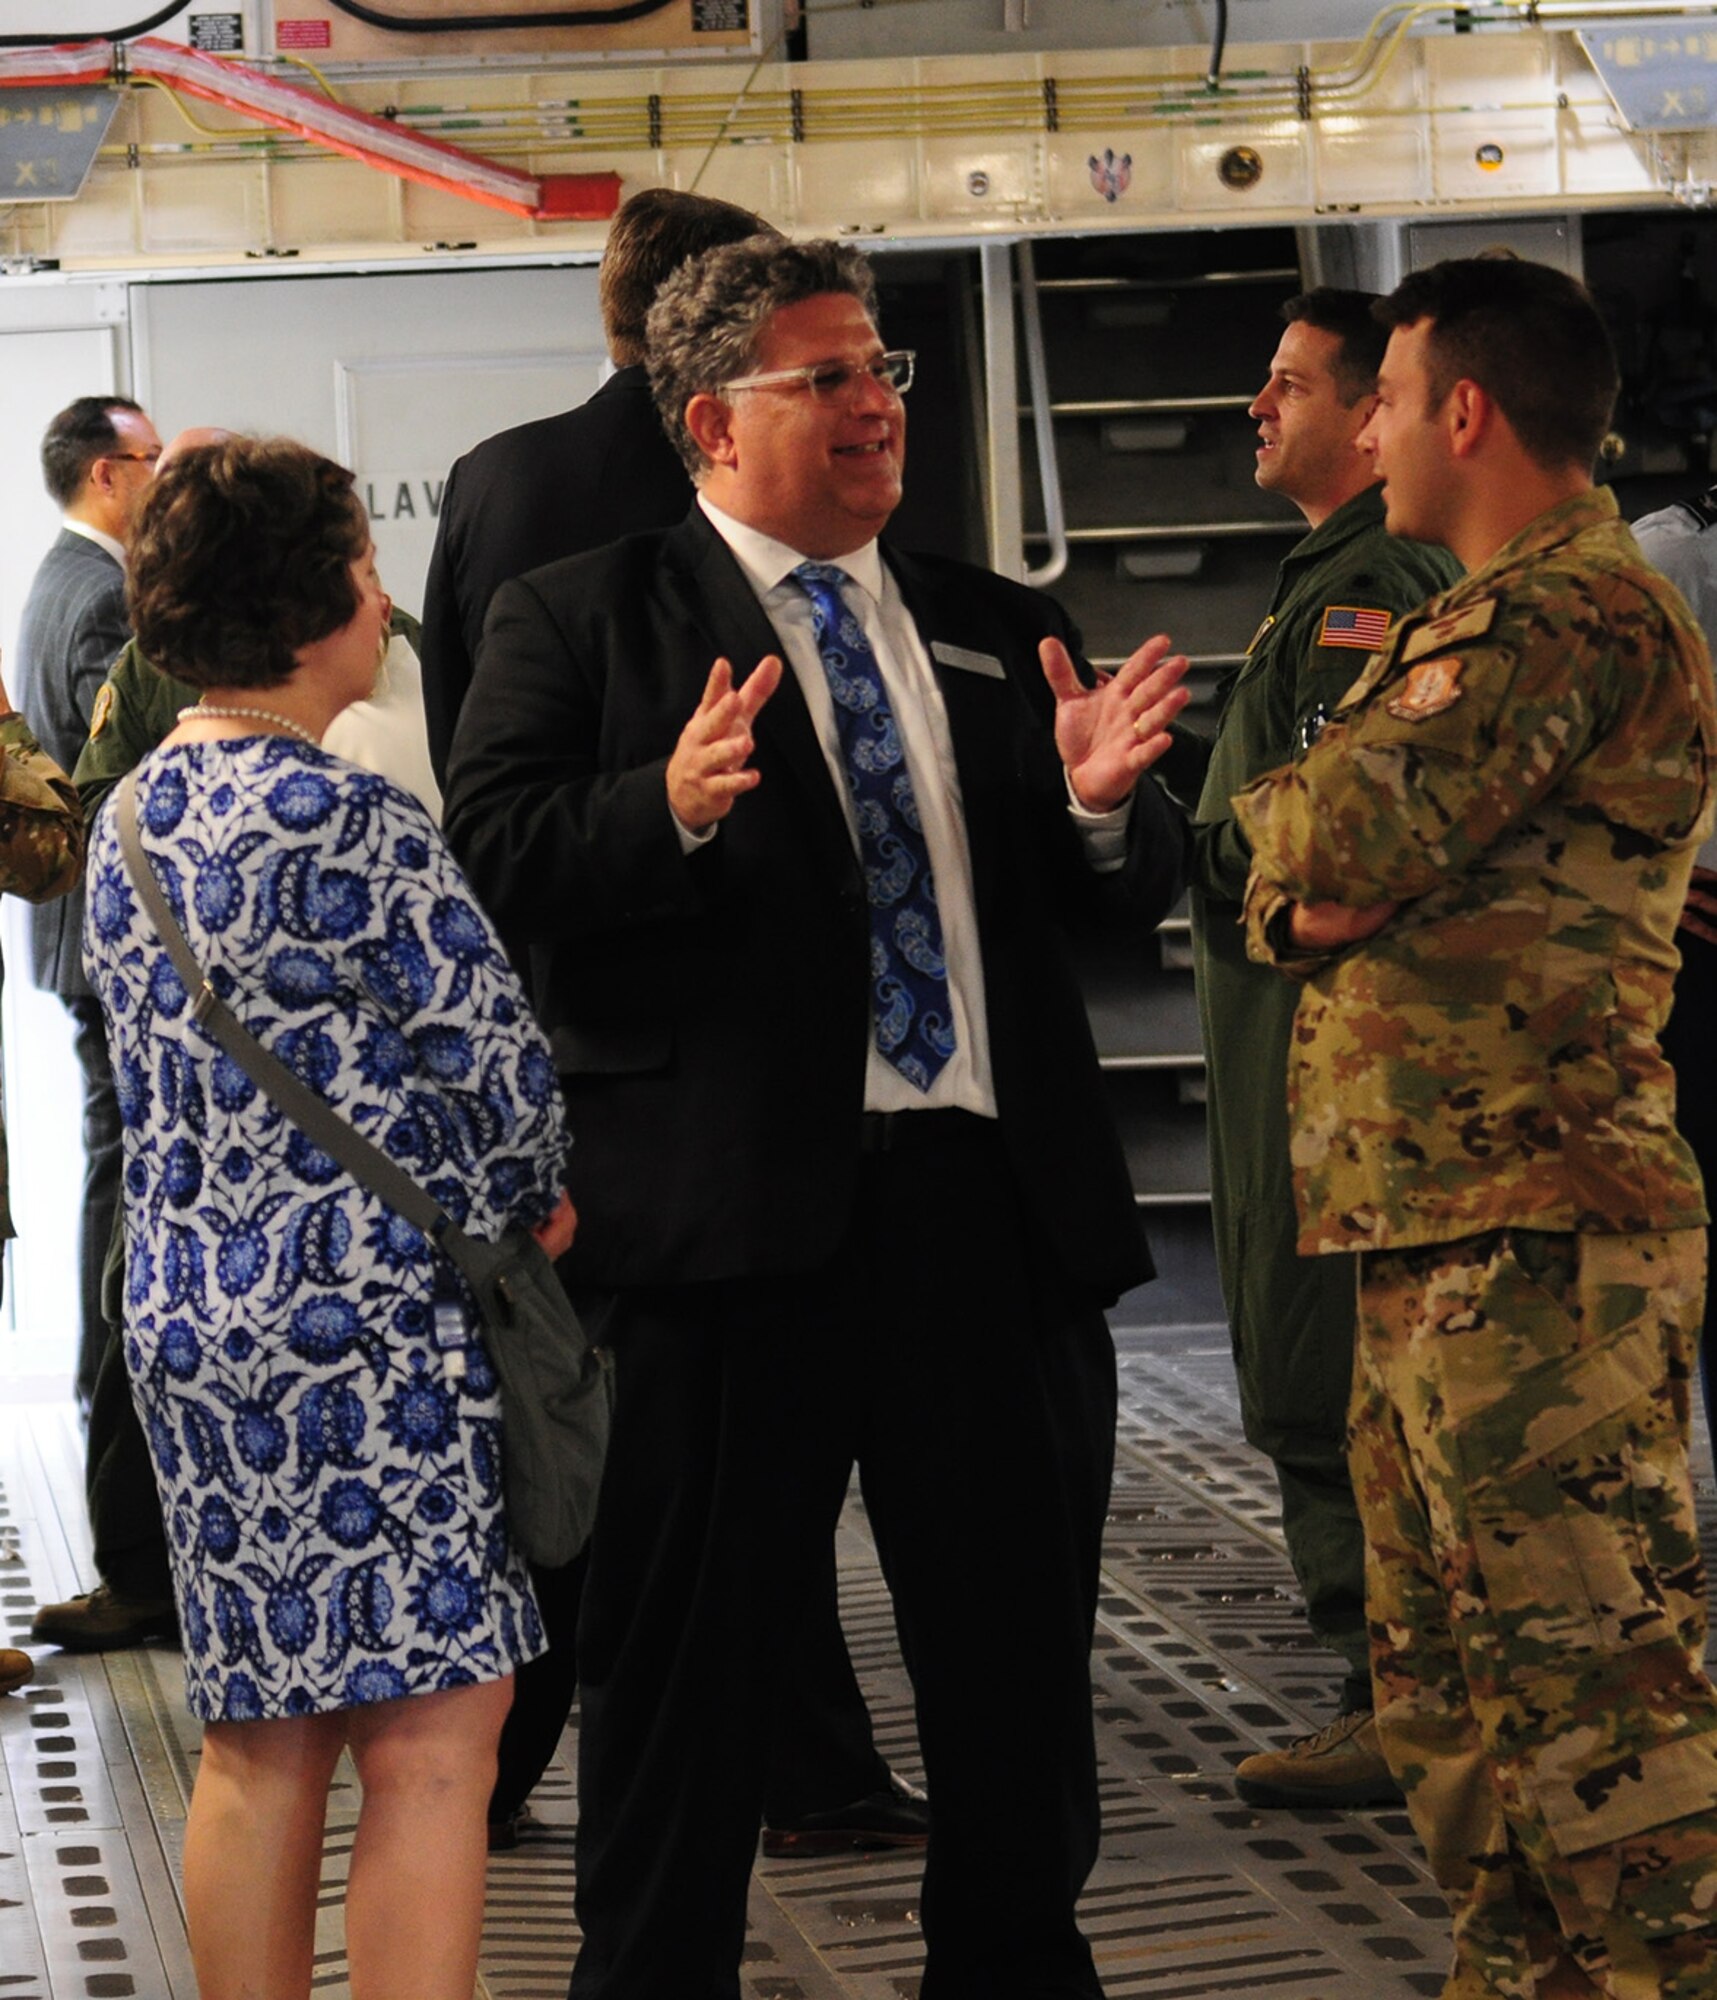 Paul Schlottman, Director of Strategic Initiatives at the University of Dayton and honorary commander for the 445th Force Support Squadron, talks to Staff Sgt. Cody Green, 89th Airlift Squadron loadmaster, during a C-17 Globemaster III tour Sept. 6, 2019. Eighteen members from the surrounding communities were officially designated as honorary commanders in an official ceremony.